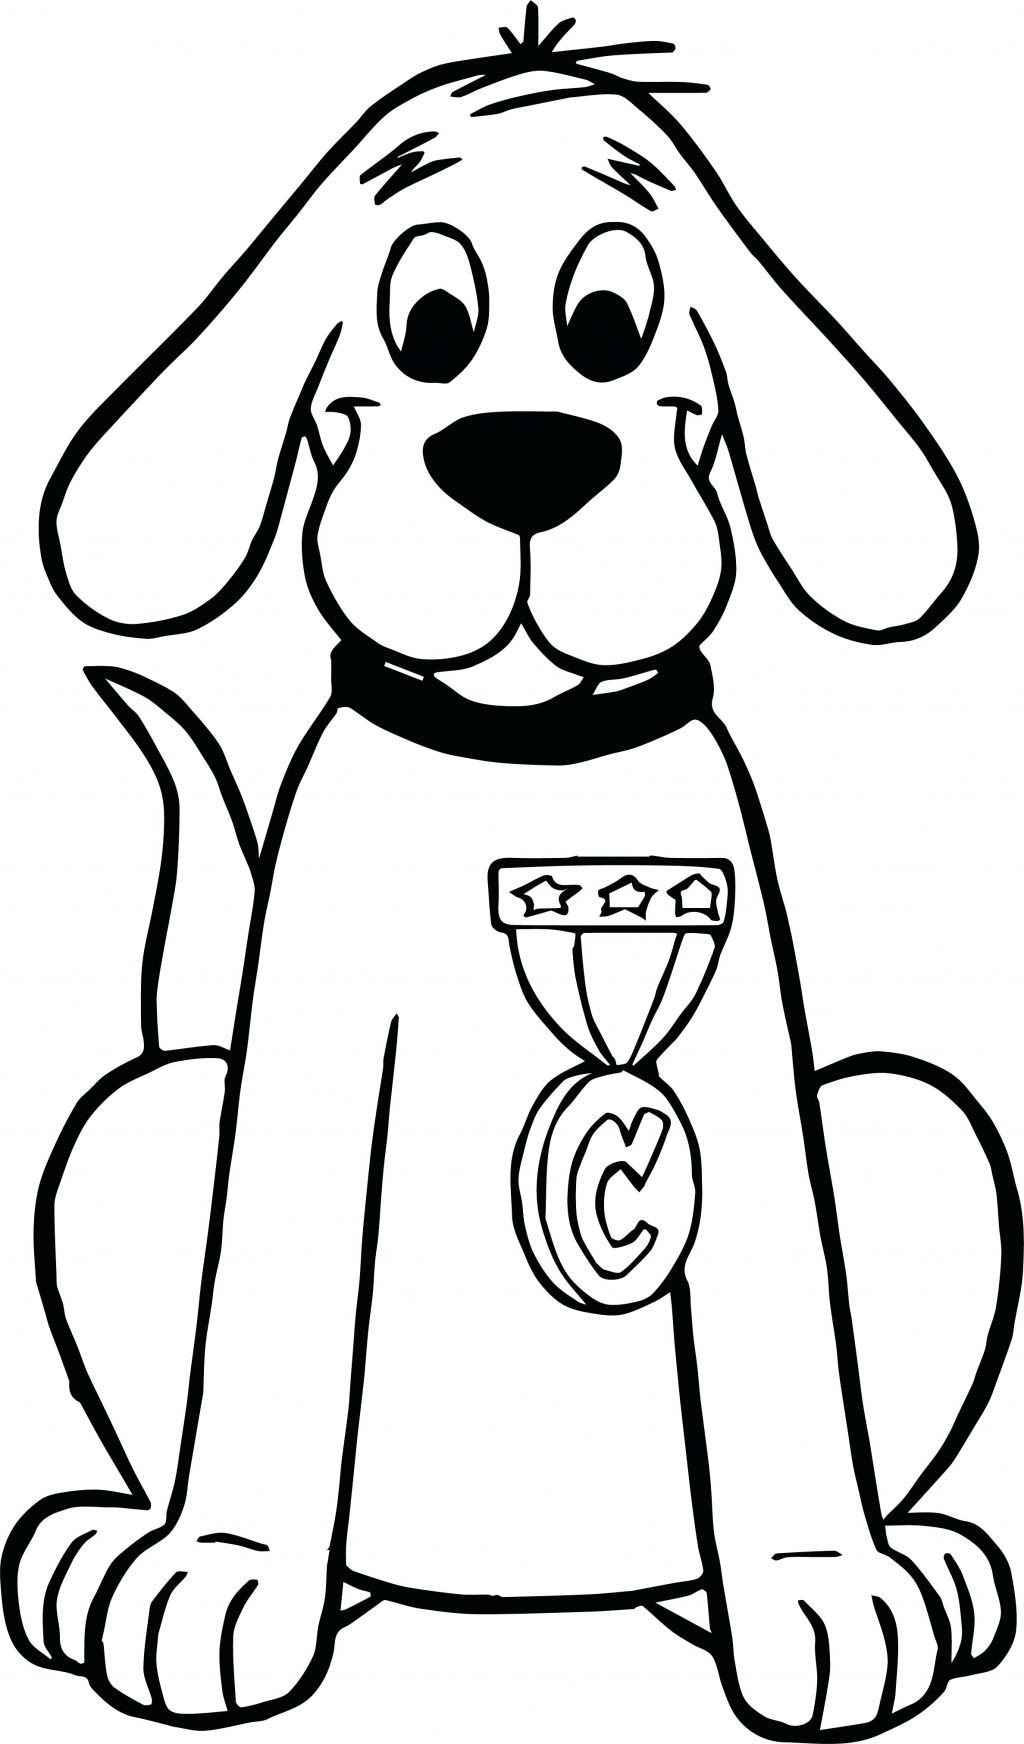 Clifford Coloring Pages at GetColorings.com | Free printable colorings